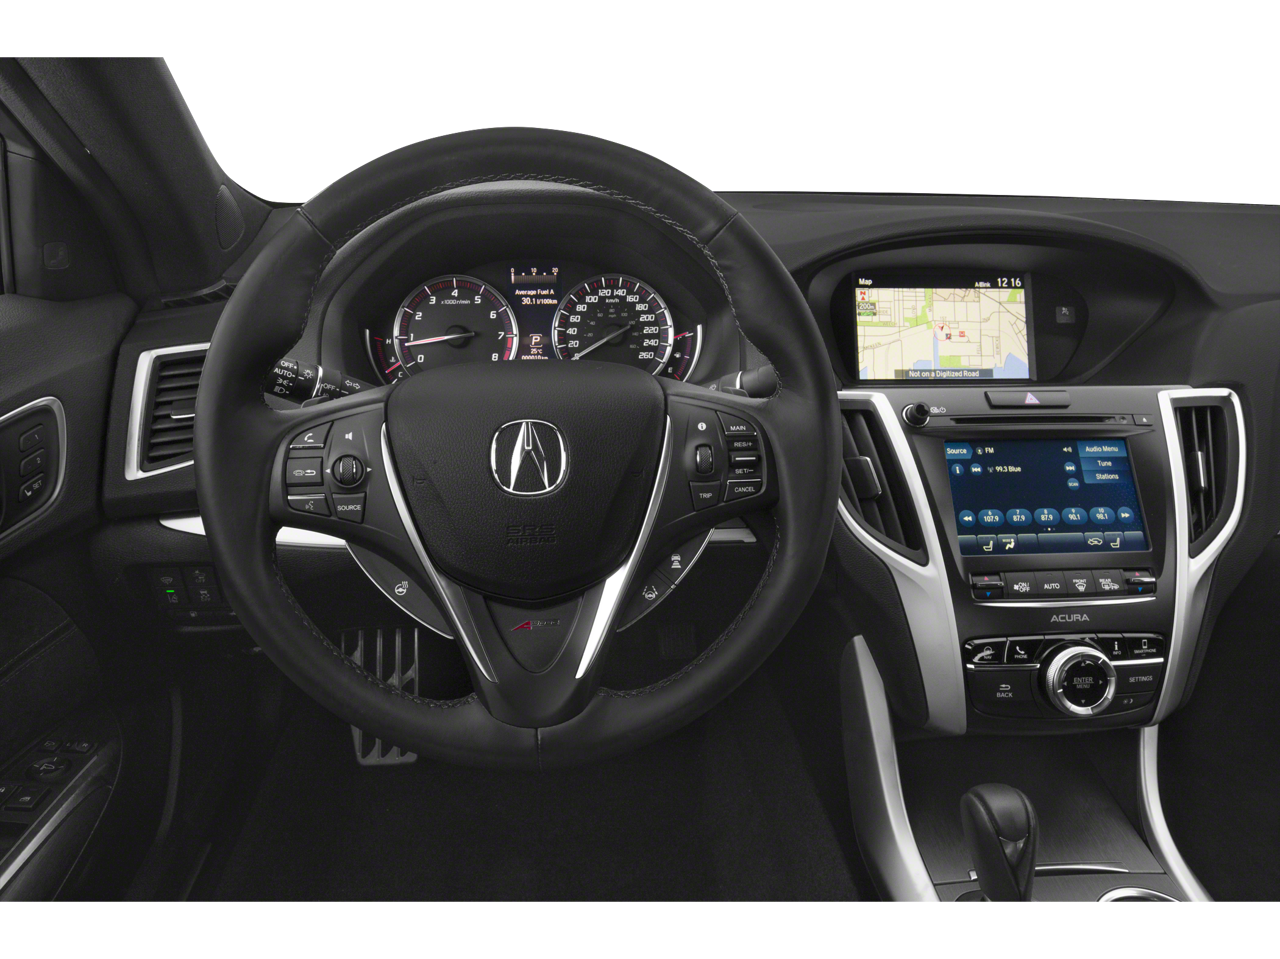 2020 Acura TLX 2.4L A-Spec Pkg